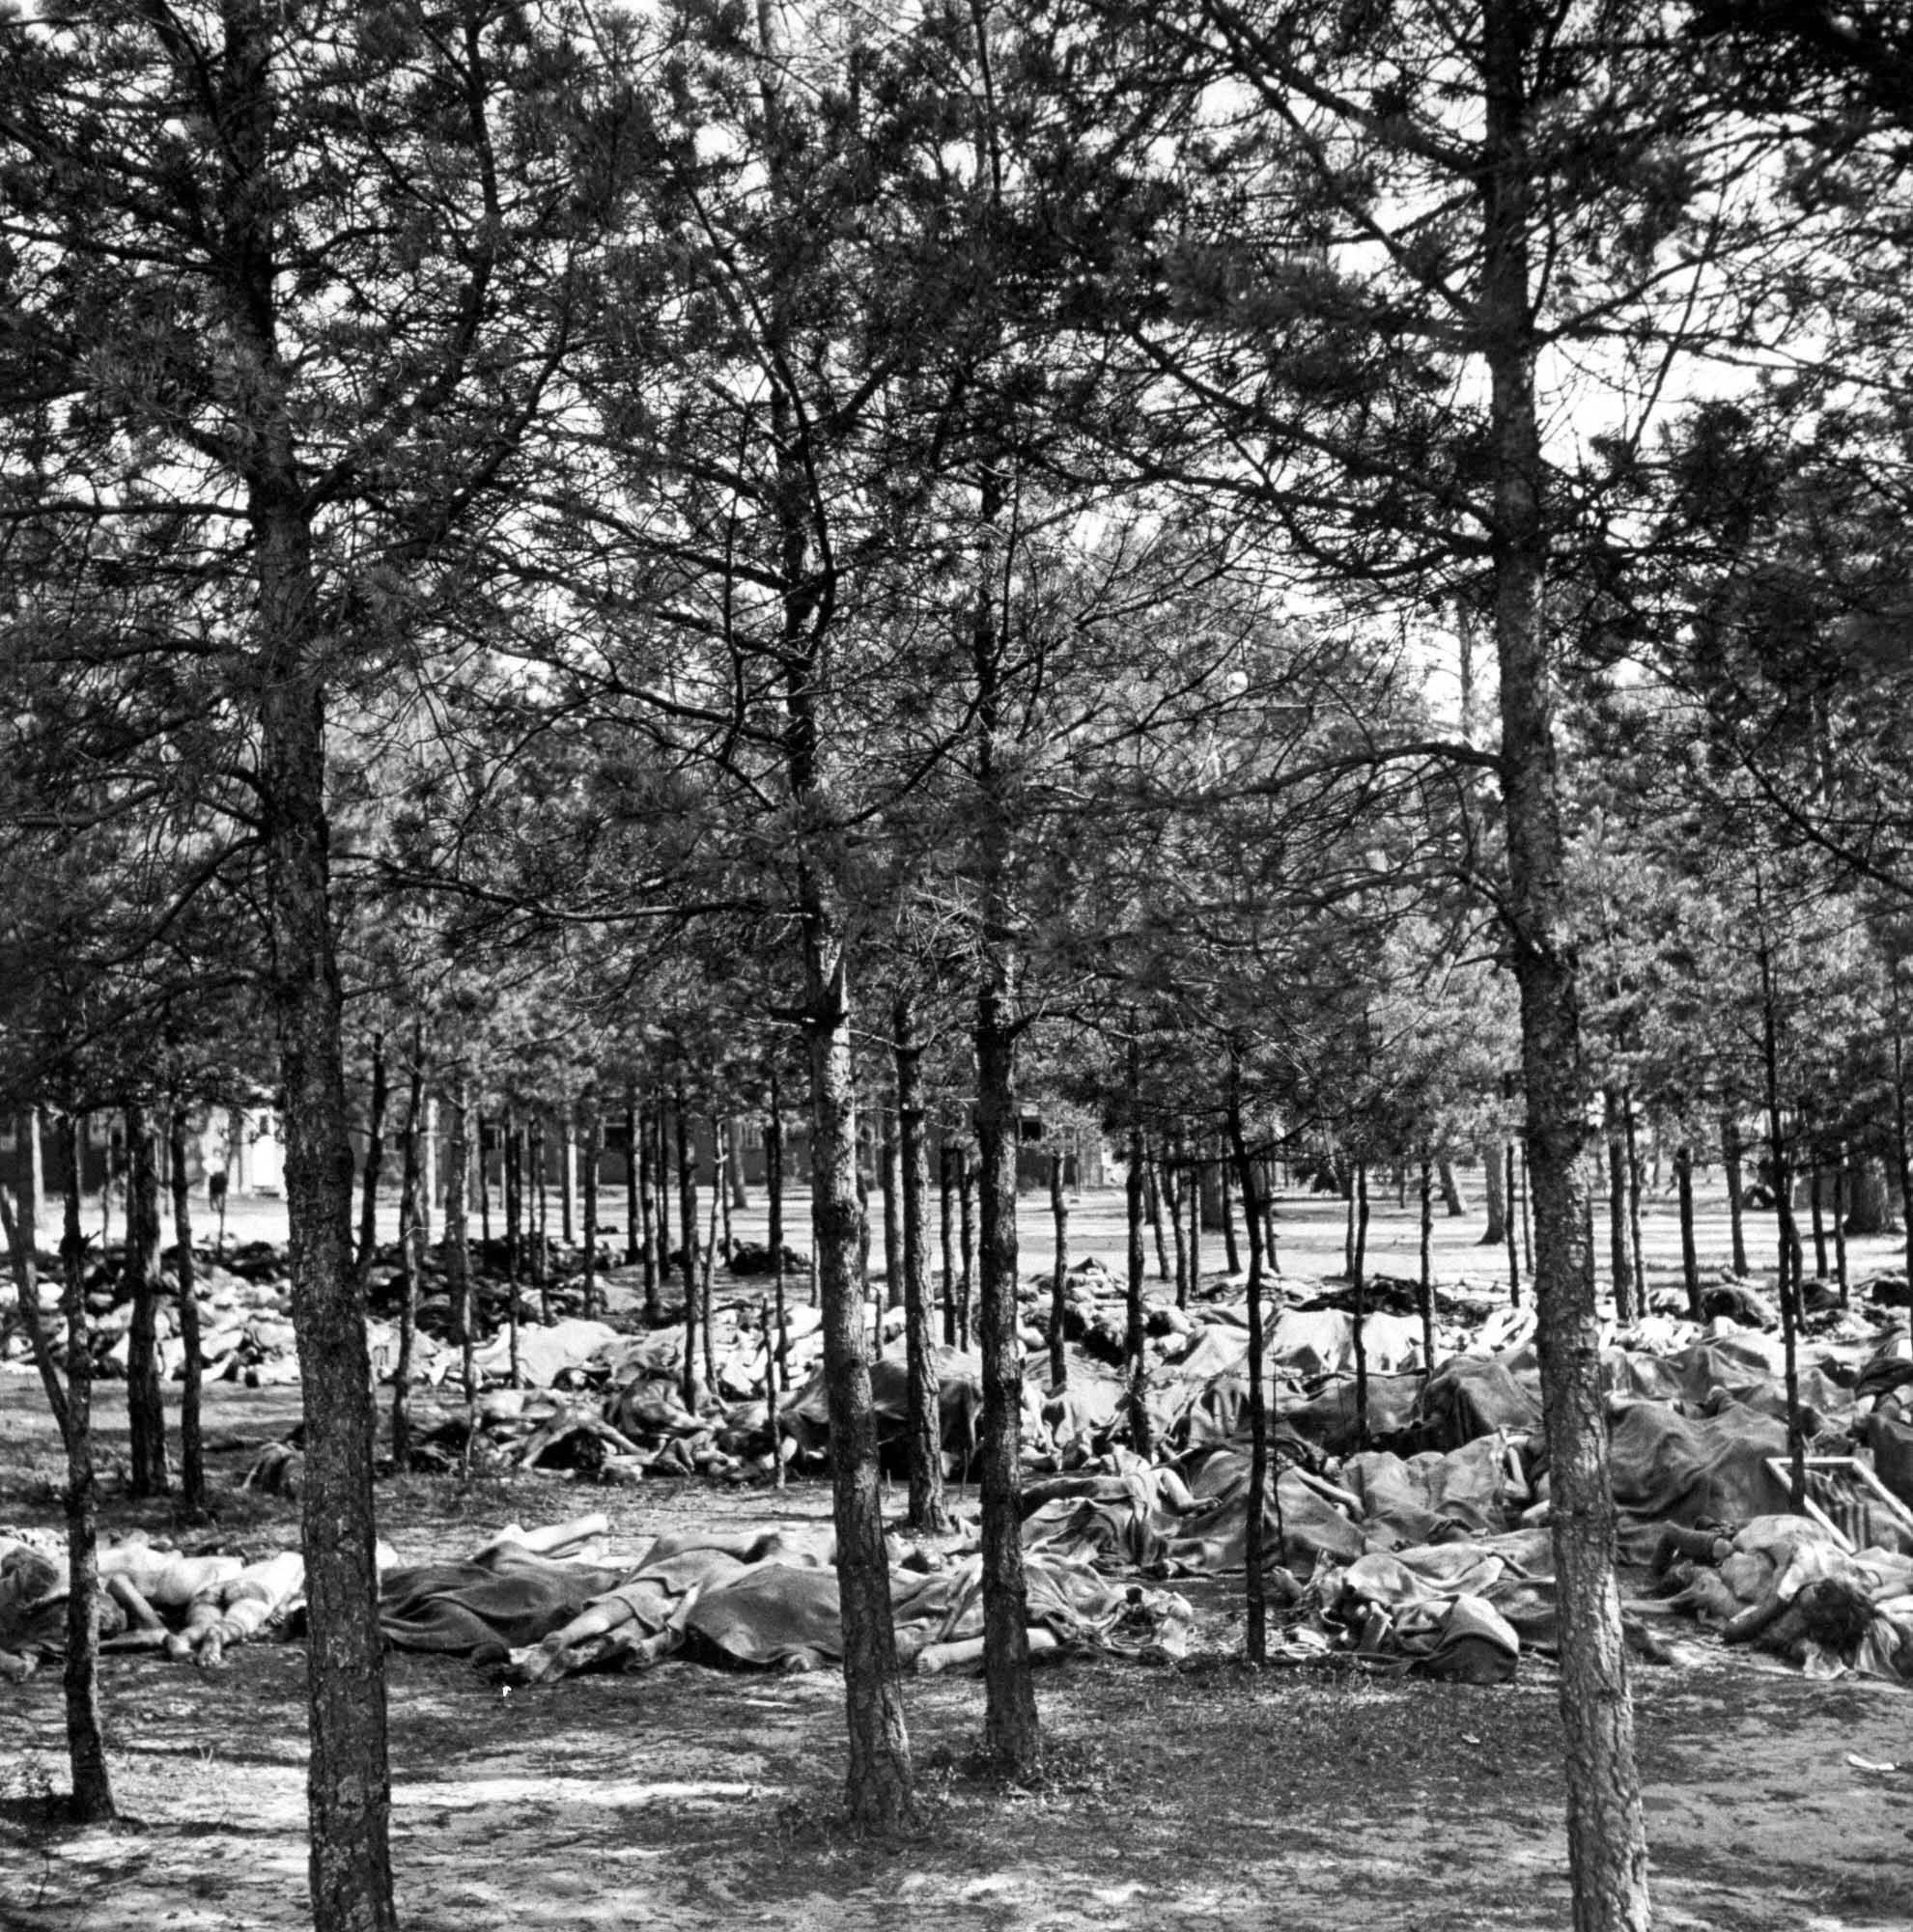 Hundreds of corpses on the ground beneath trees at Bergen-Belsen concentration camp, April 1945.